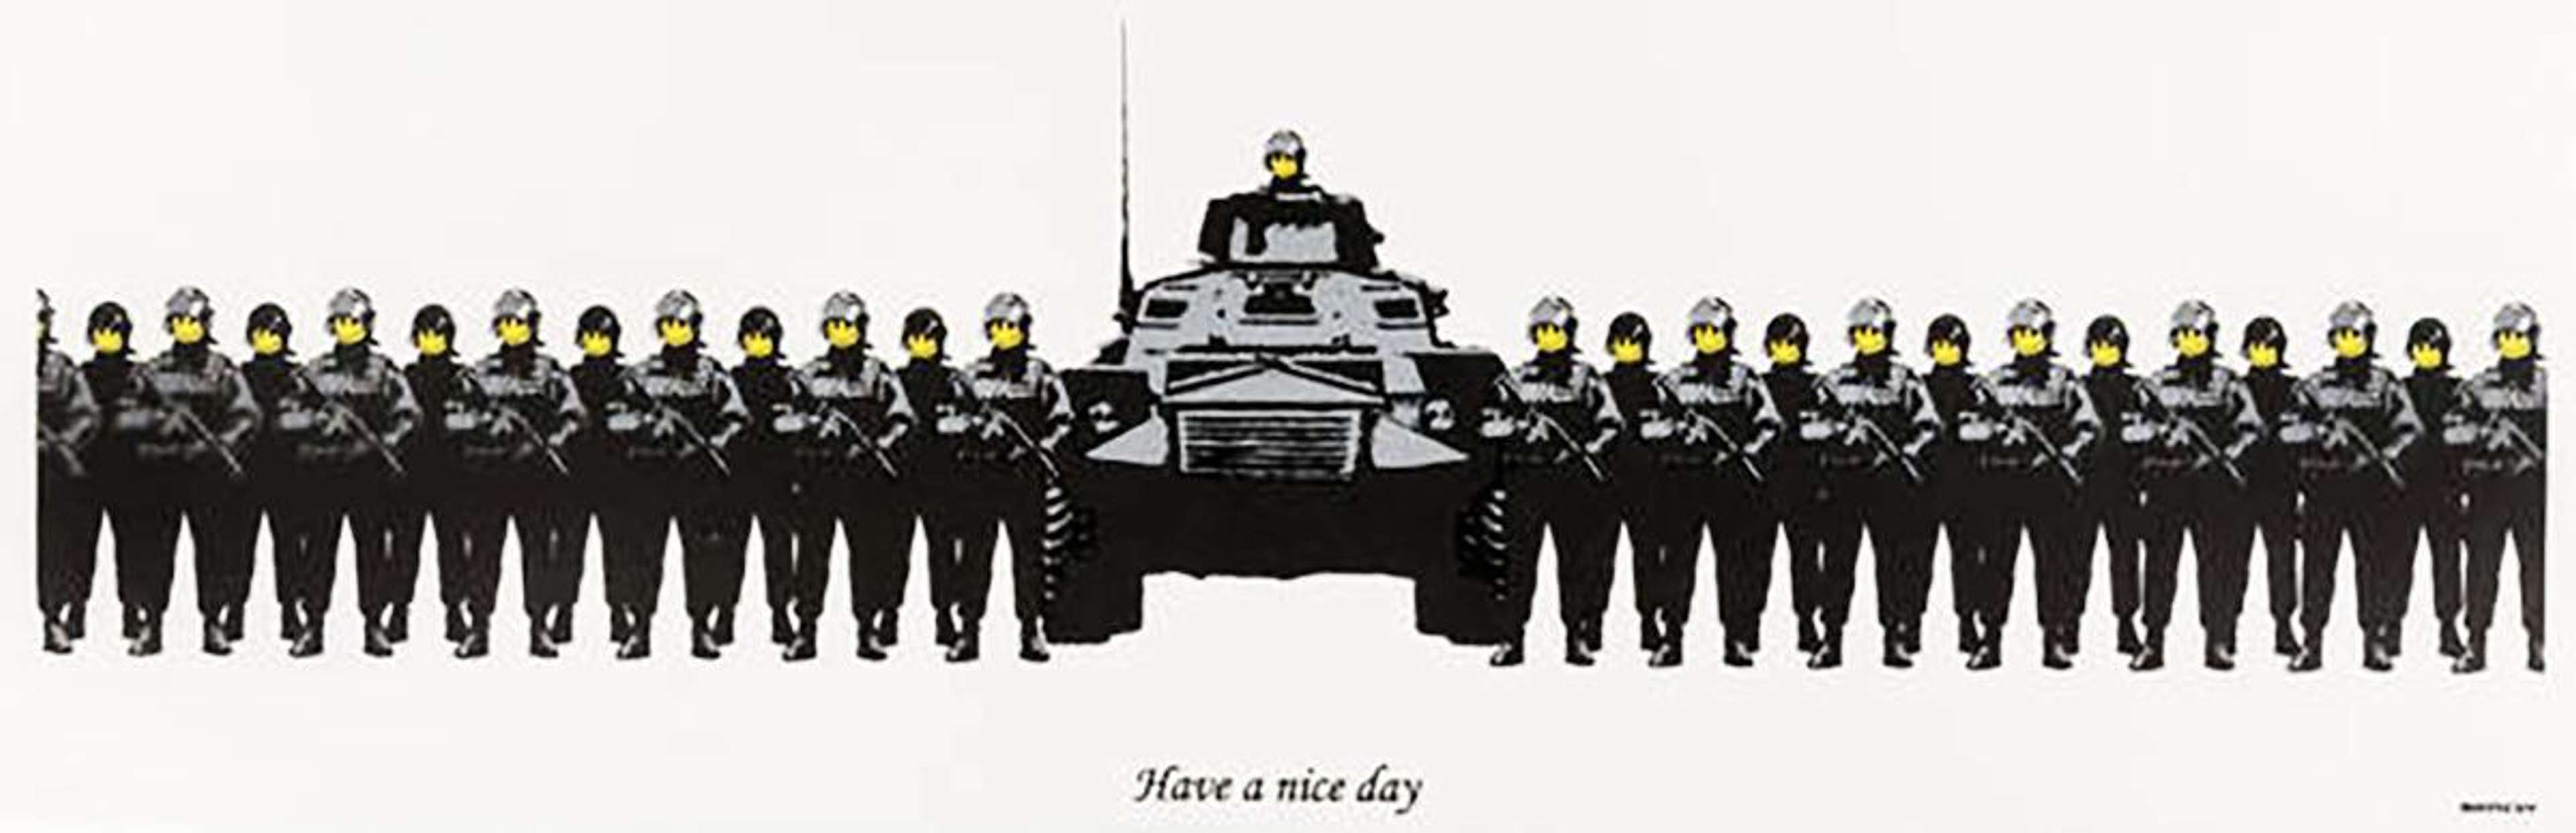 Have A Nice Day (Anarchist Book Fair)